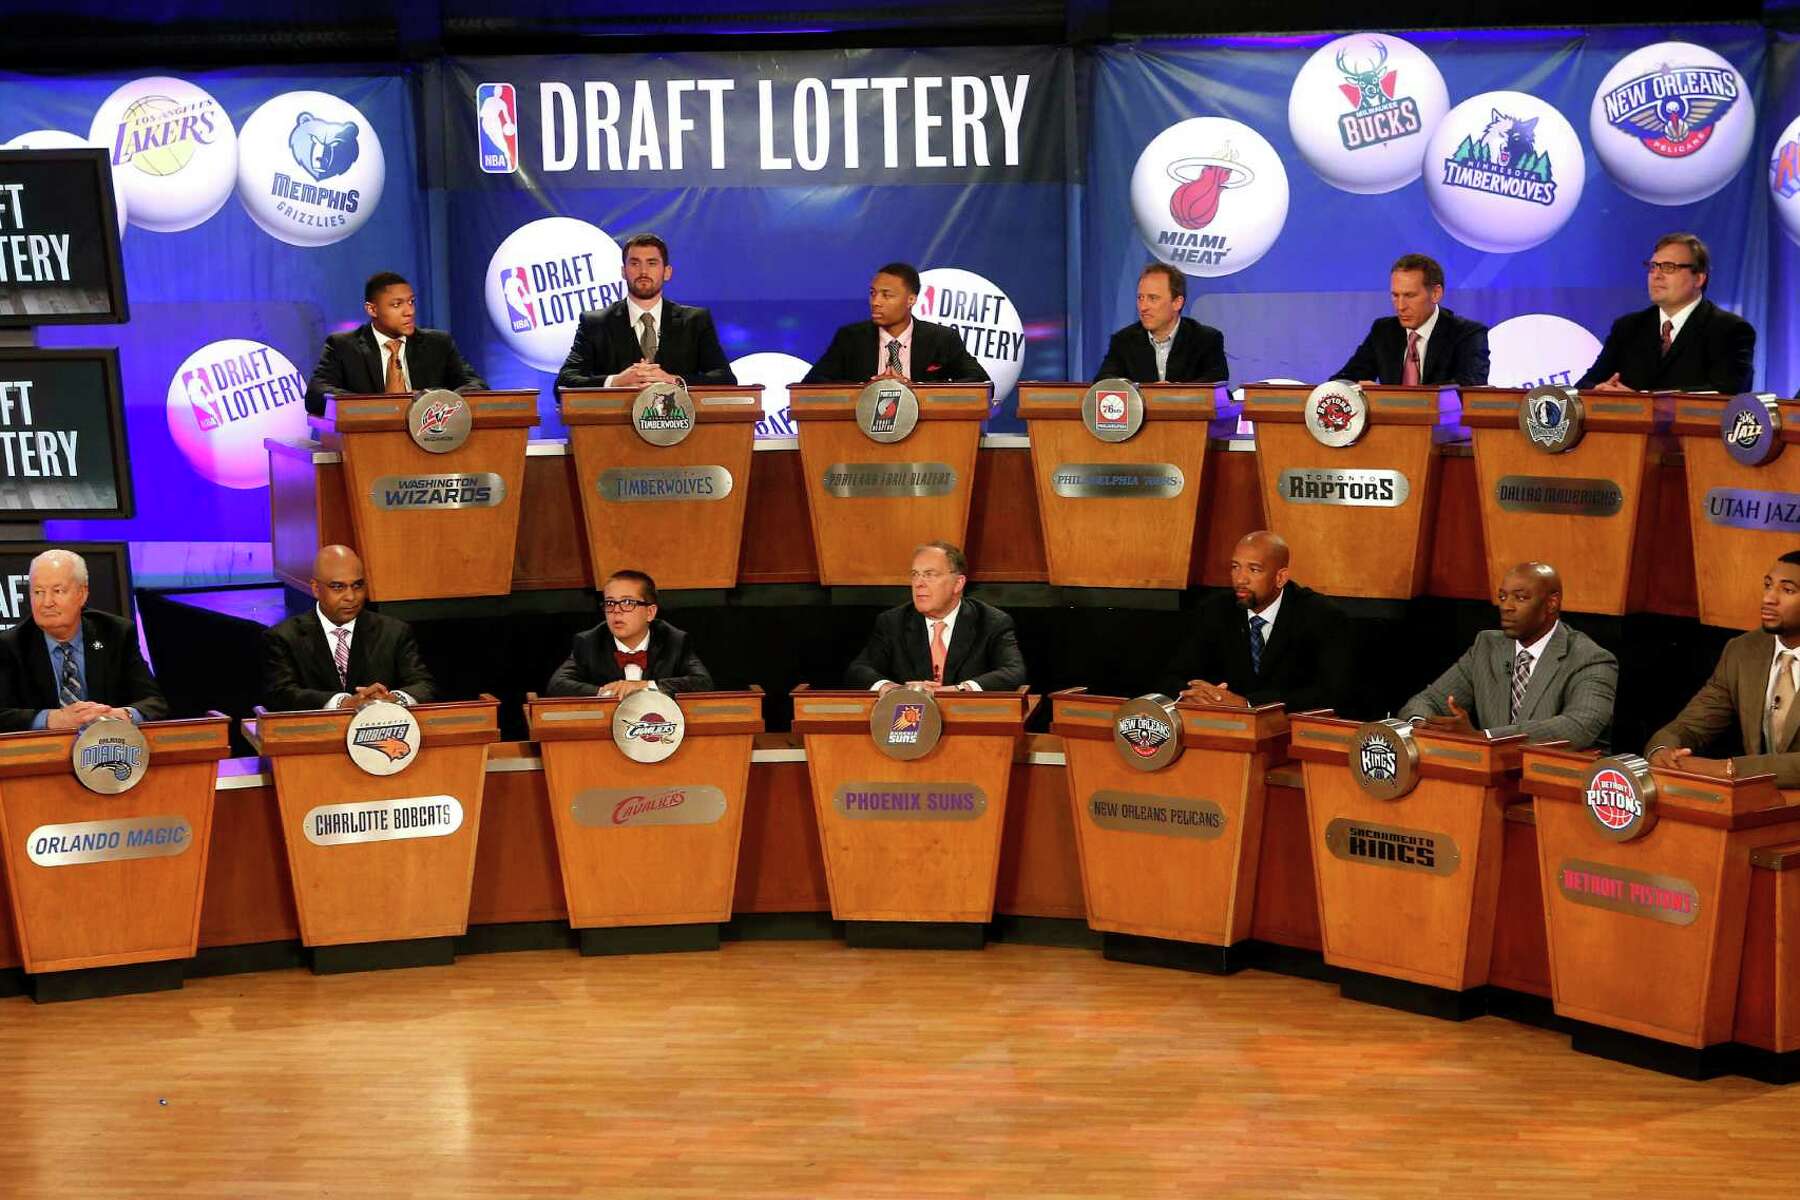 KSAT News Now: Spurs get number 1 draft pick in NBA lottery, Recalls issued  for Jeep and Ford